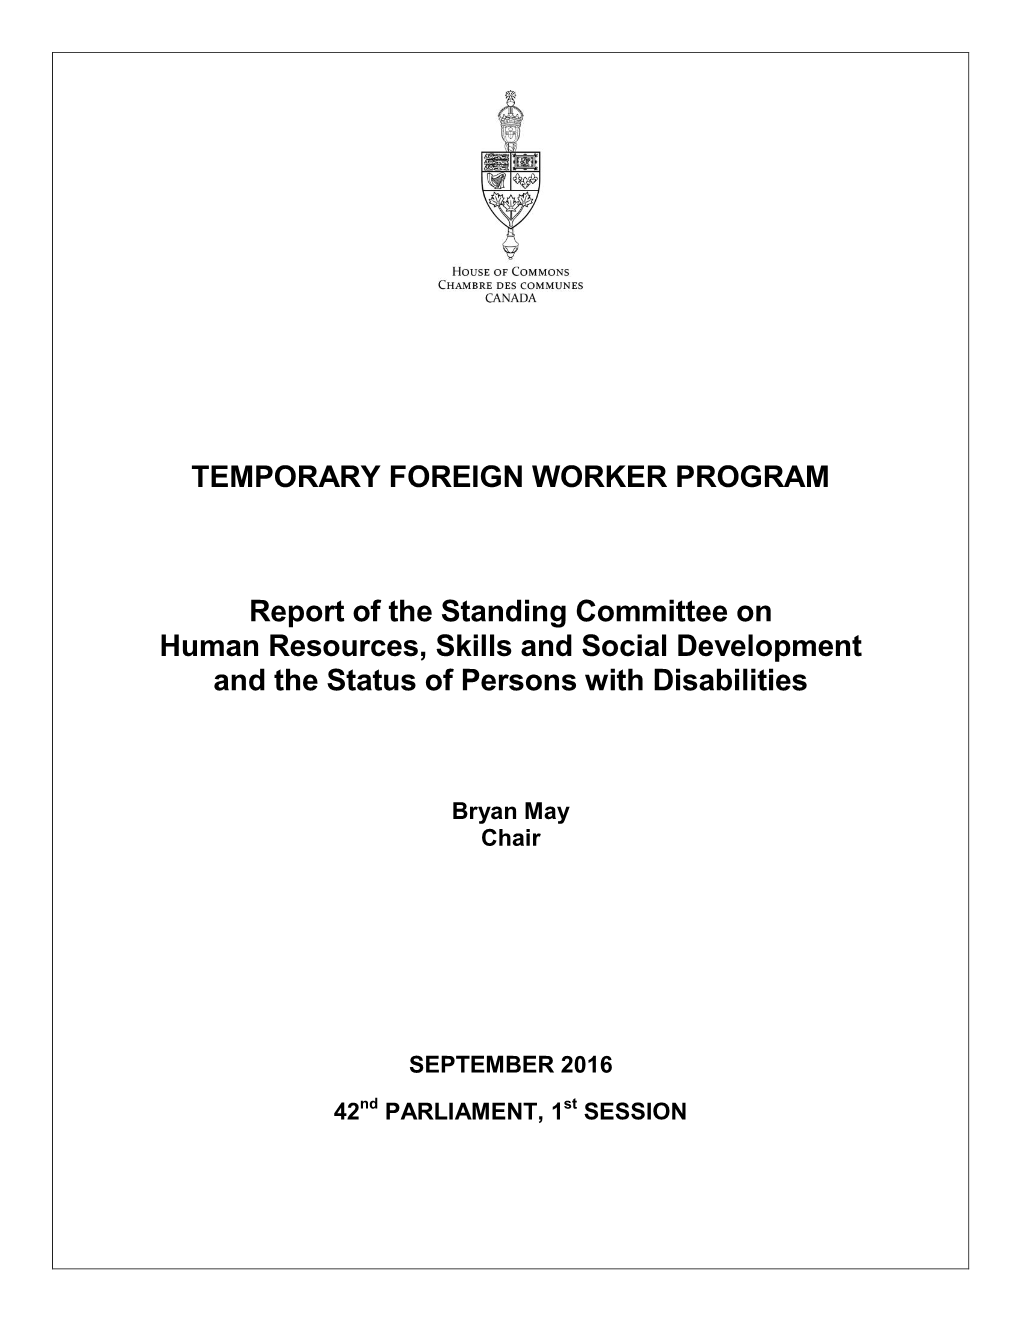 A Report on the Temporary Foreign Worker Program